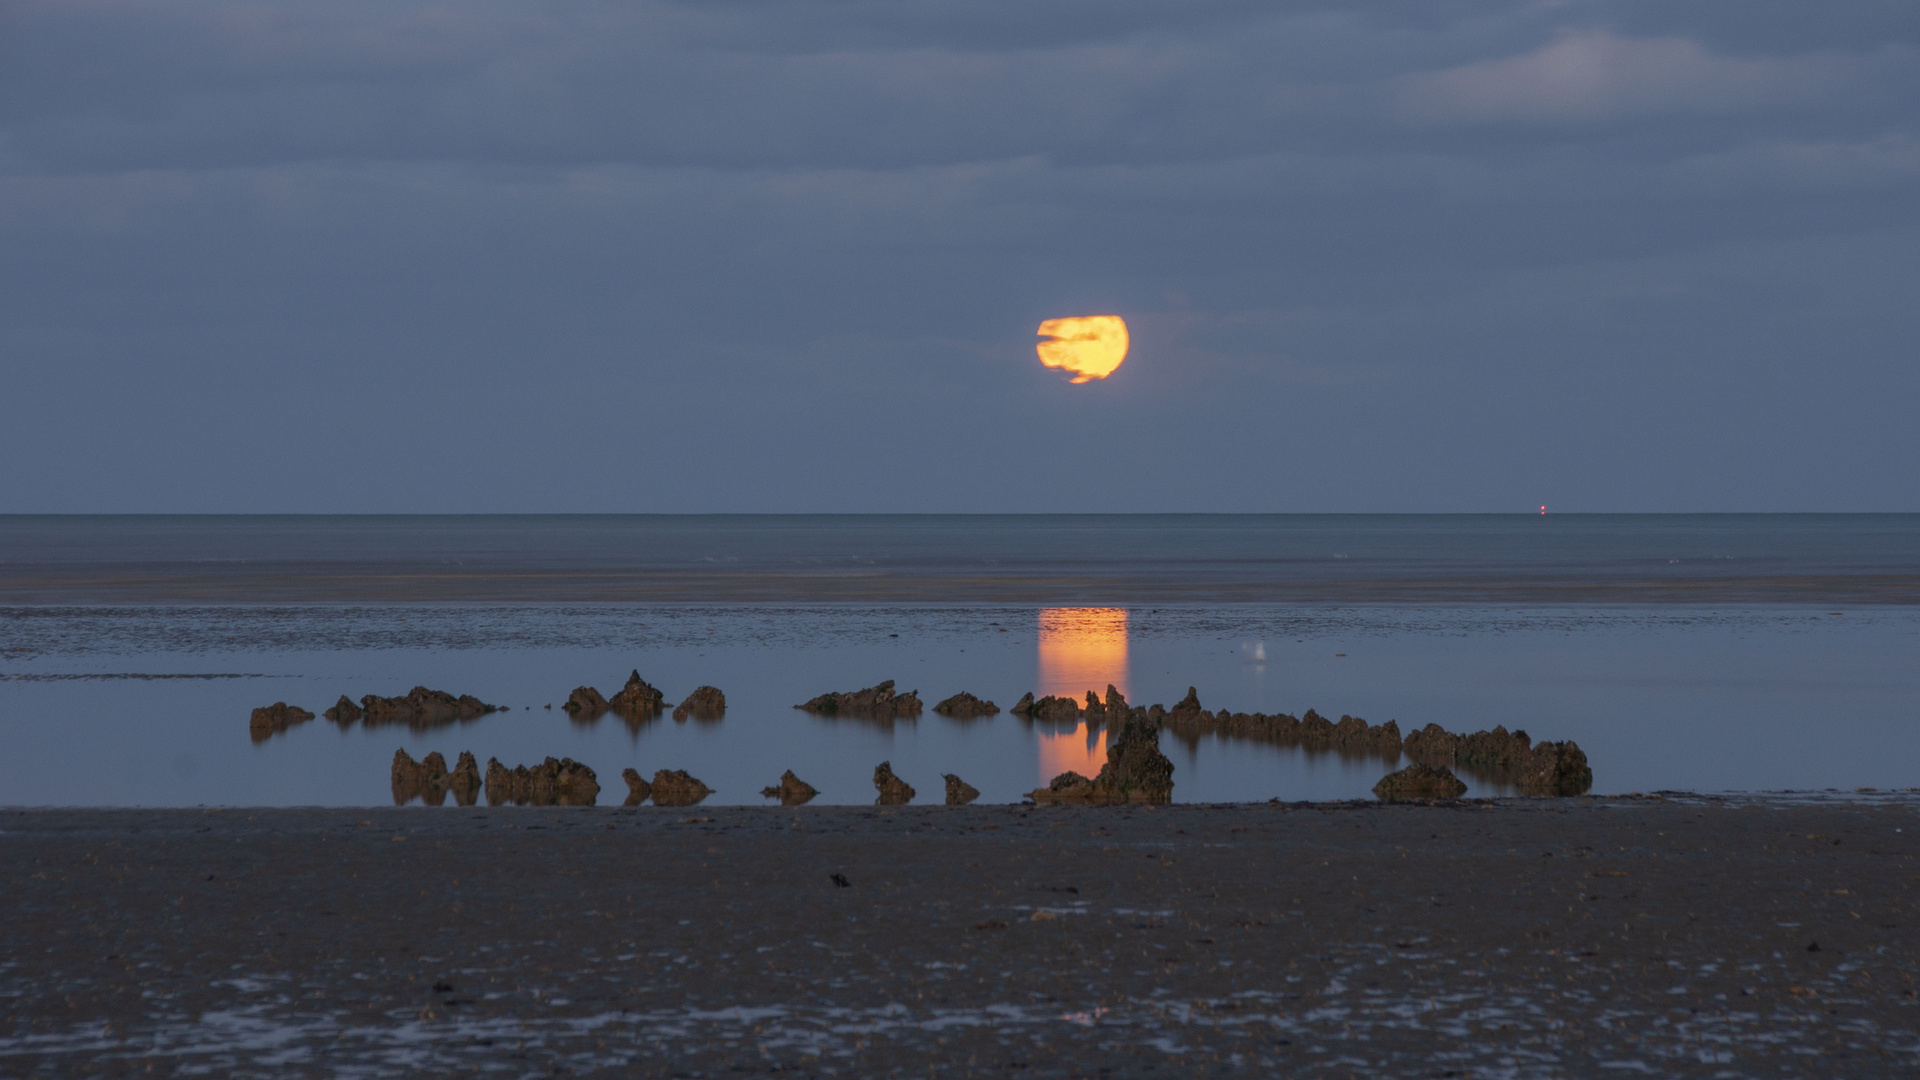 Moonrise over Wreck